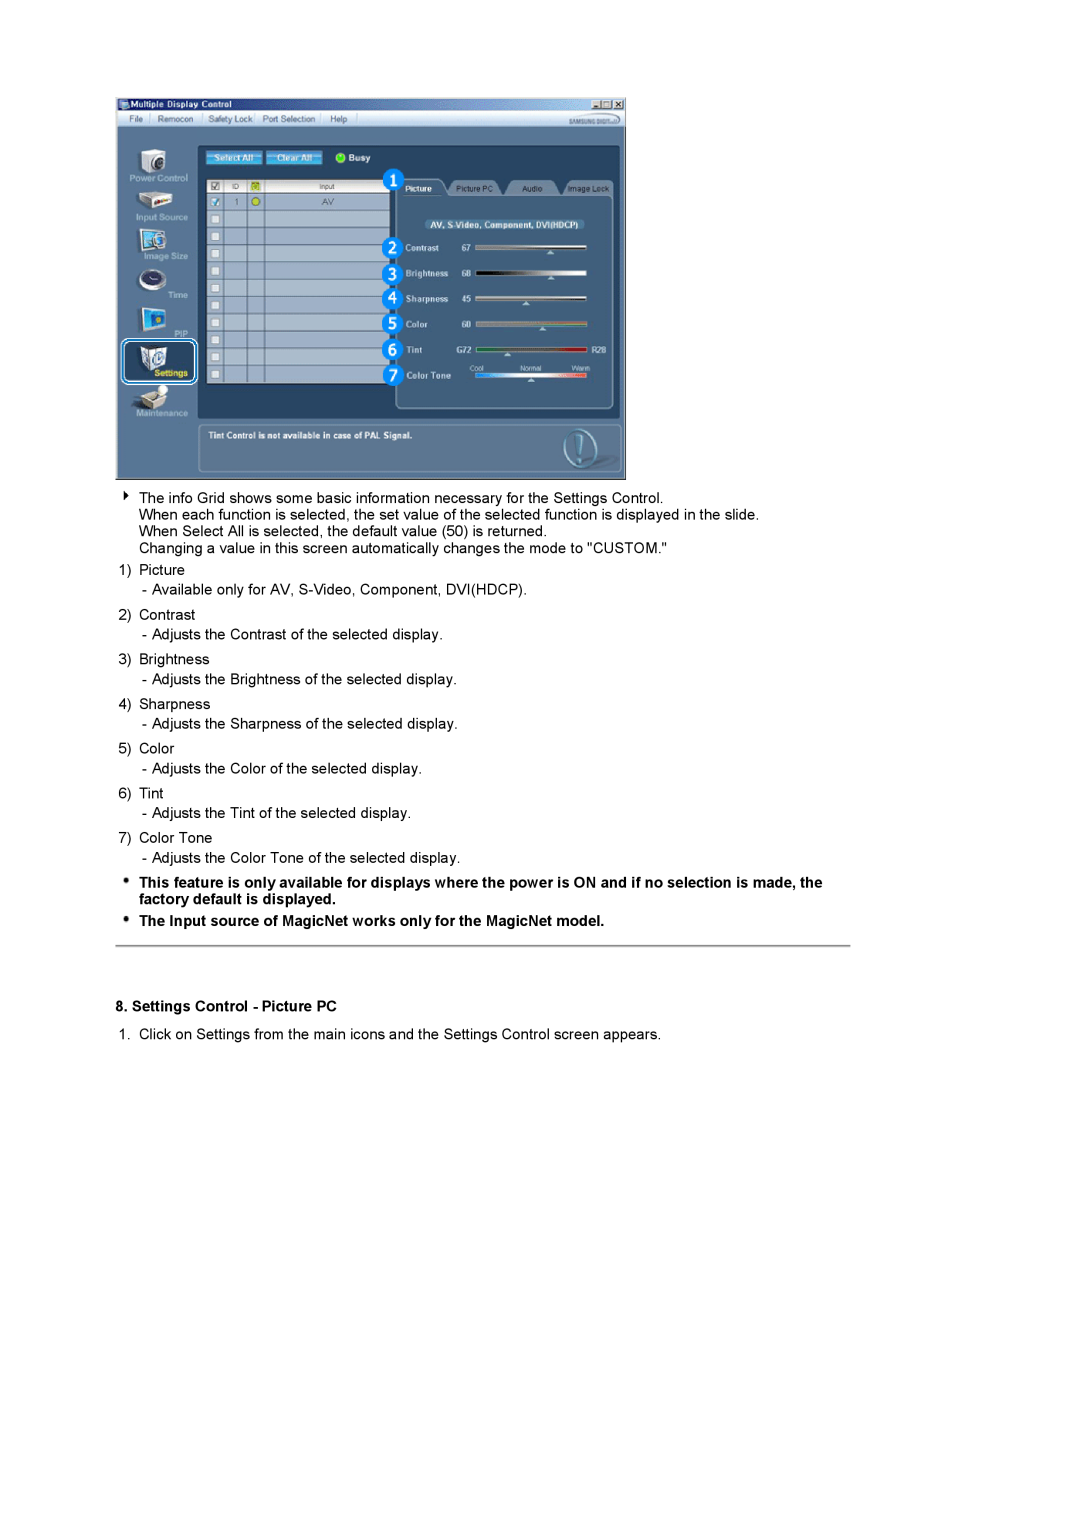 Samsung 320P manual The Input source of MagicNet works only for the MagicNet model, Settings Control - Picture PC 